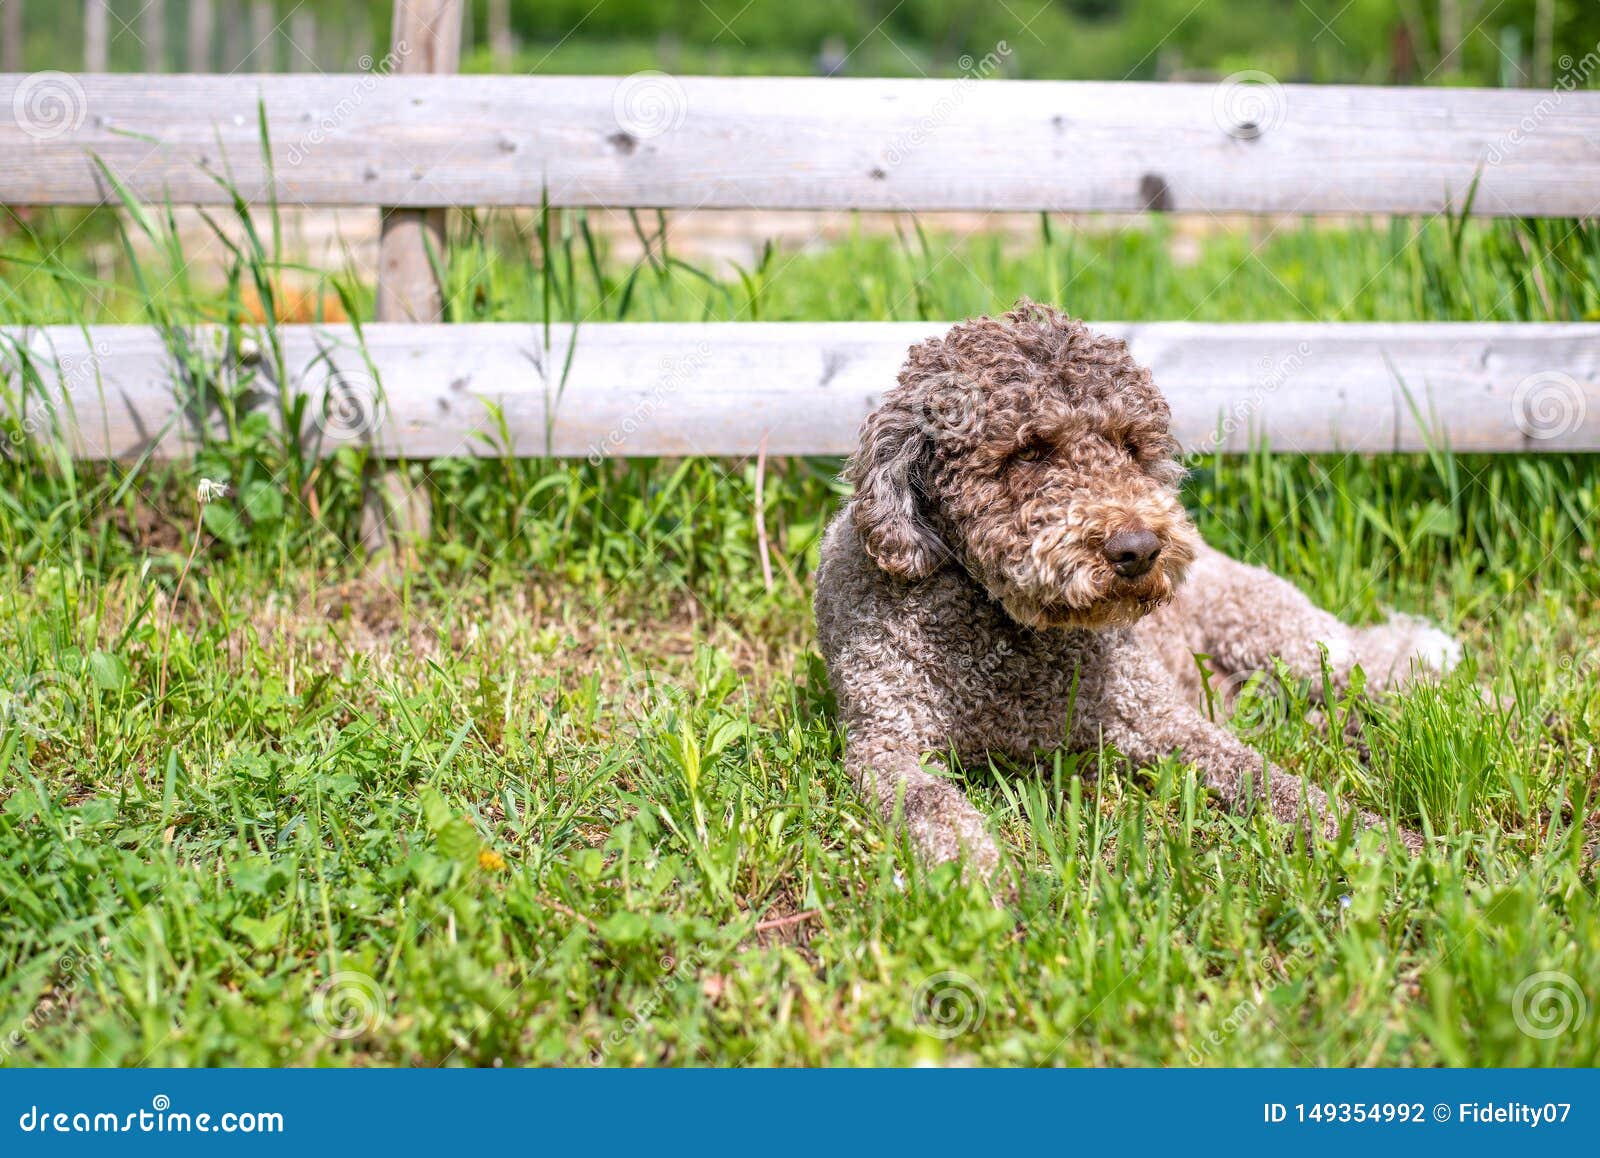 Lagotto Romagnolo Wooly Coat Dog In The Grass Stock Photo